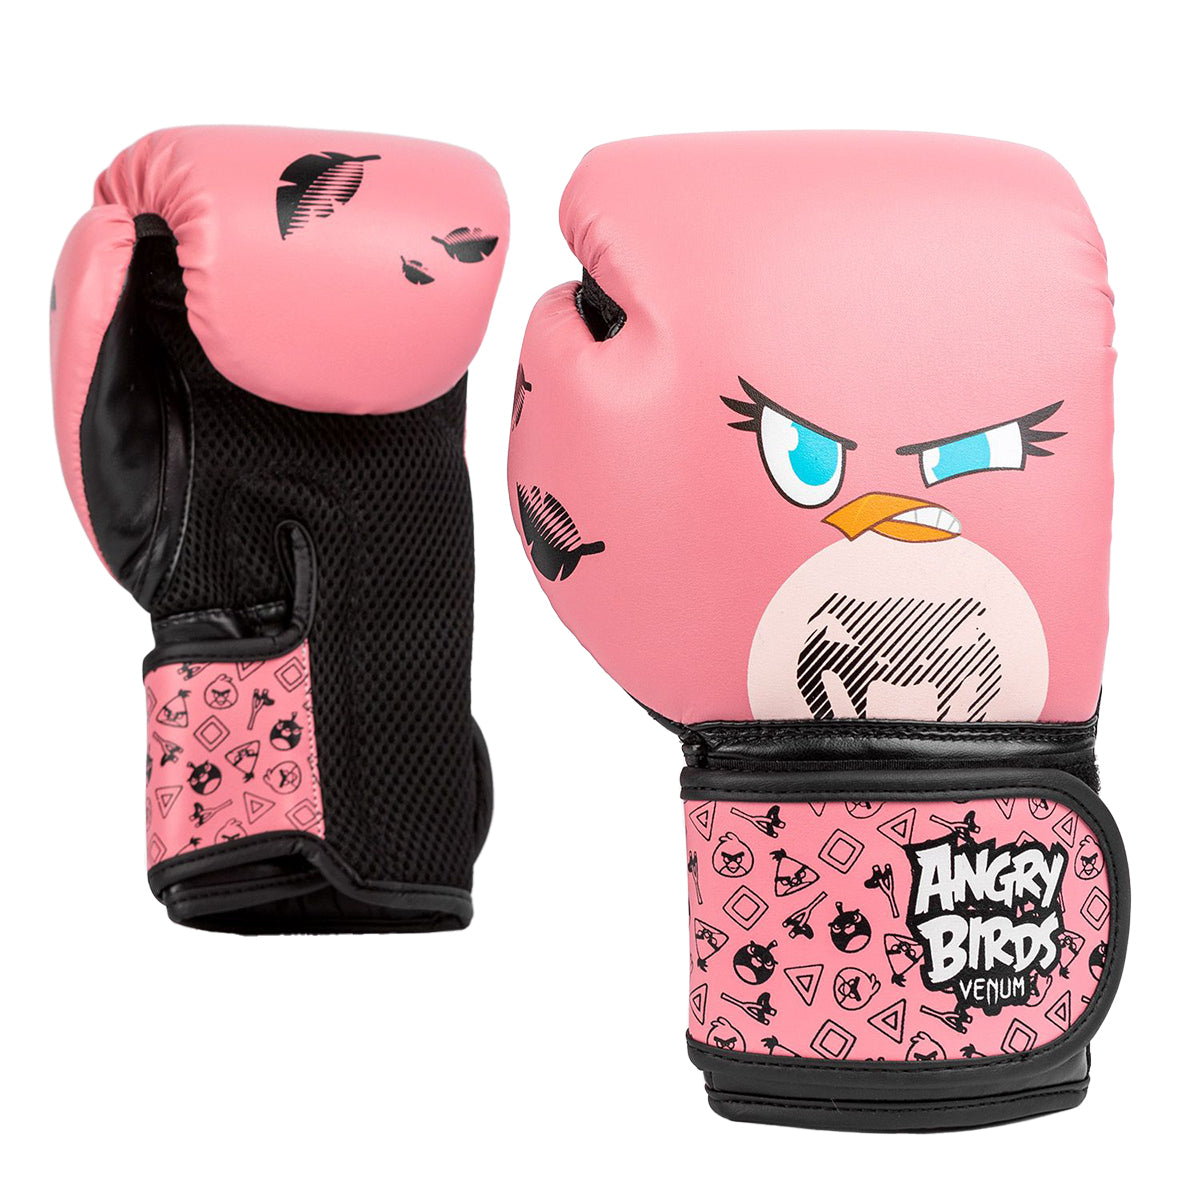 Venum Kids Angry Birds Boxing Gloves - Pink